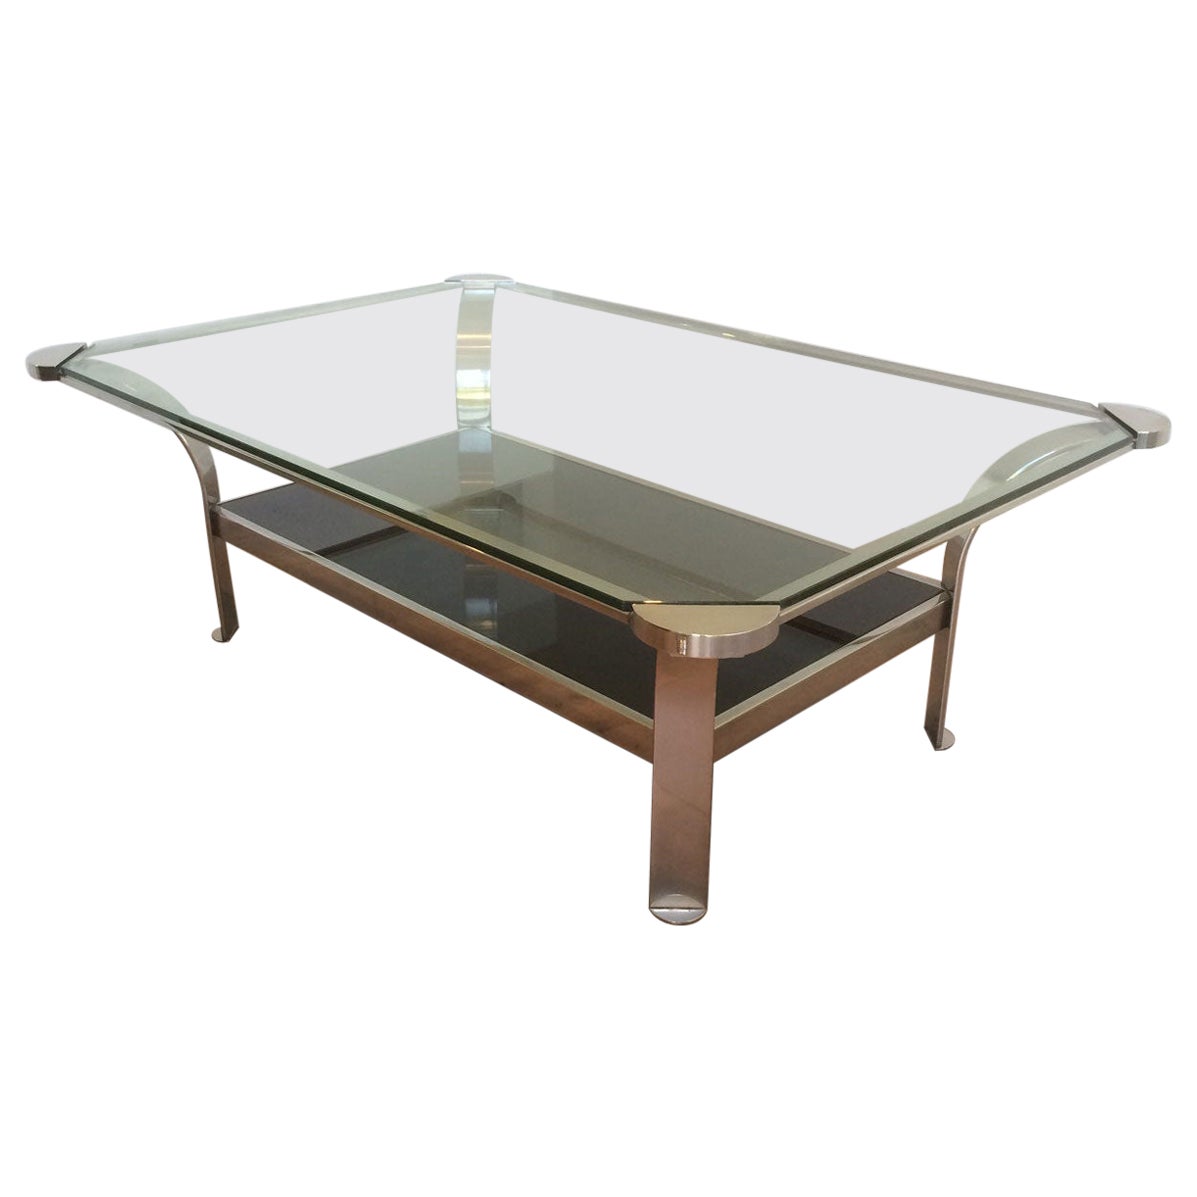 Large Design Chrome Coffee Table with Glass Shelves